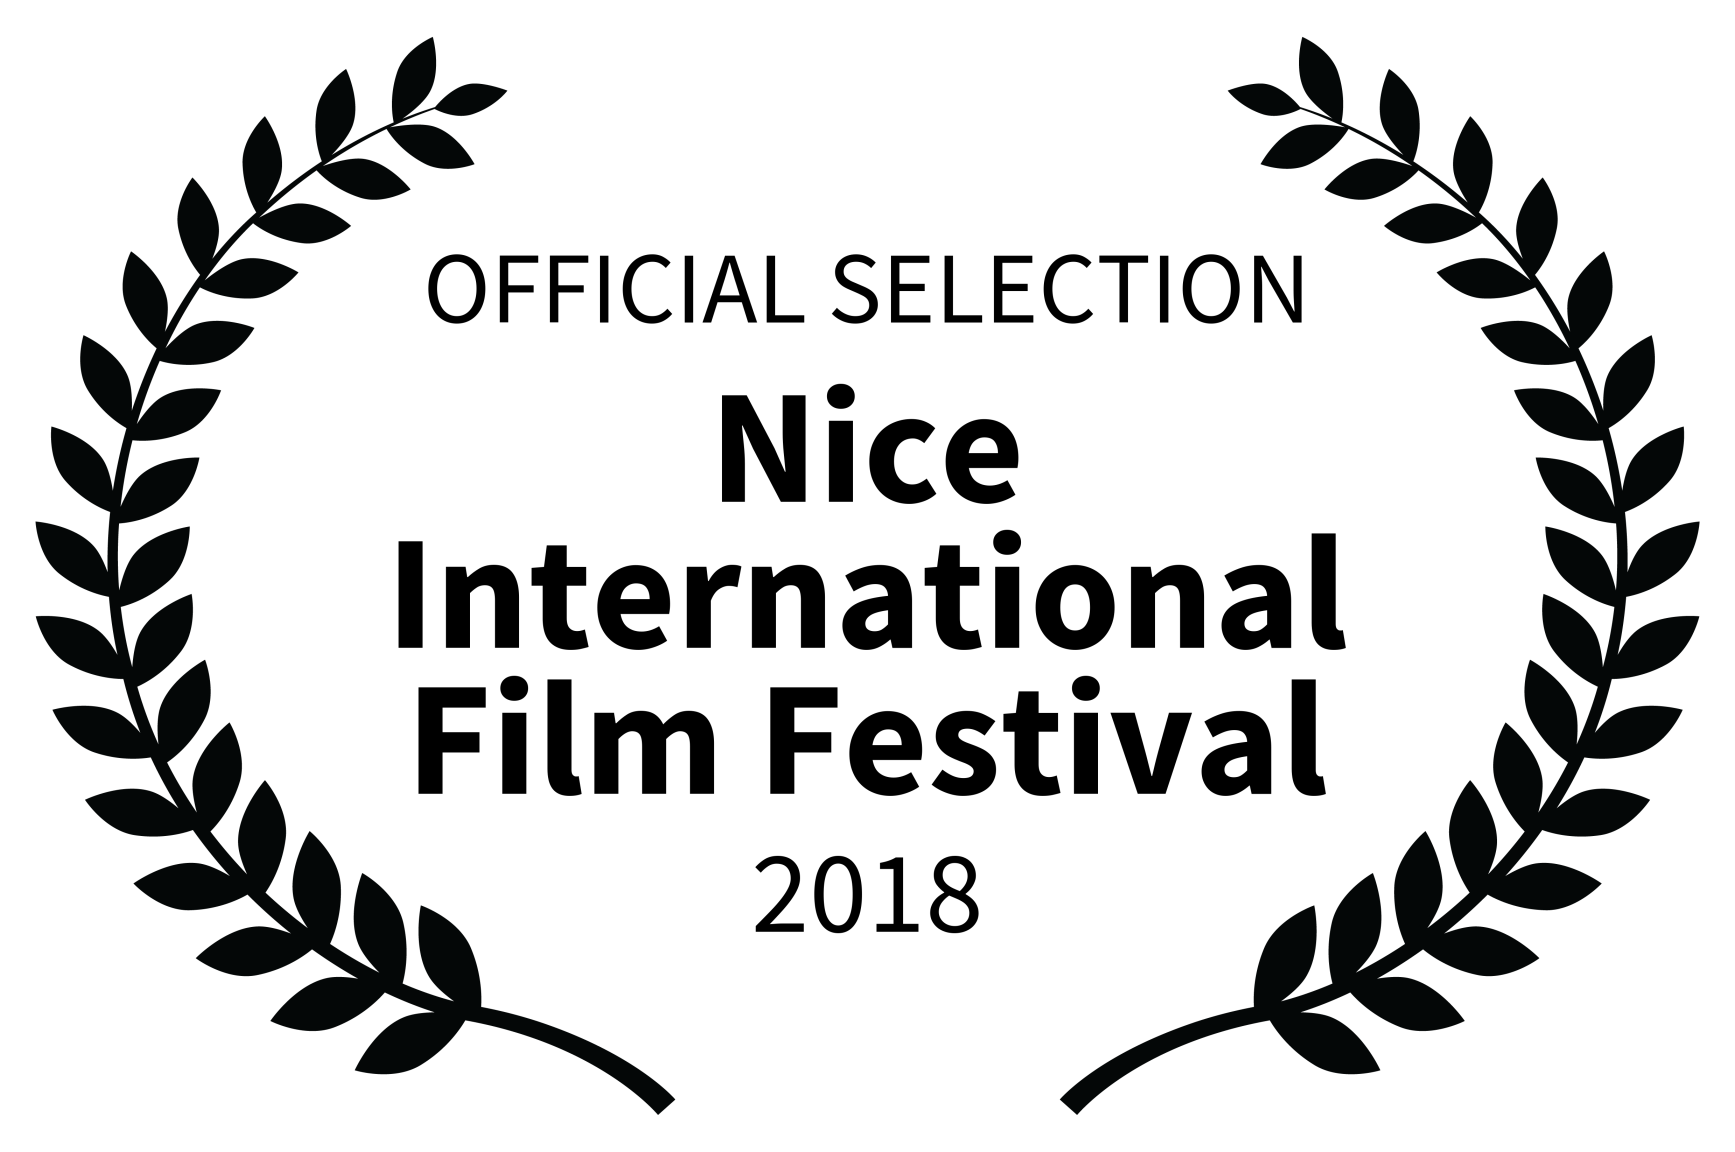 Laurel for Official Selection at Nice International Film Festival awarded to 'L'estoc' in 2018